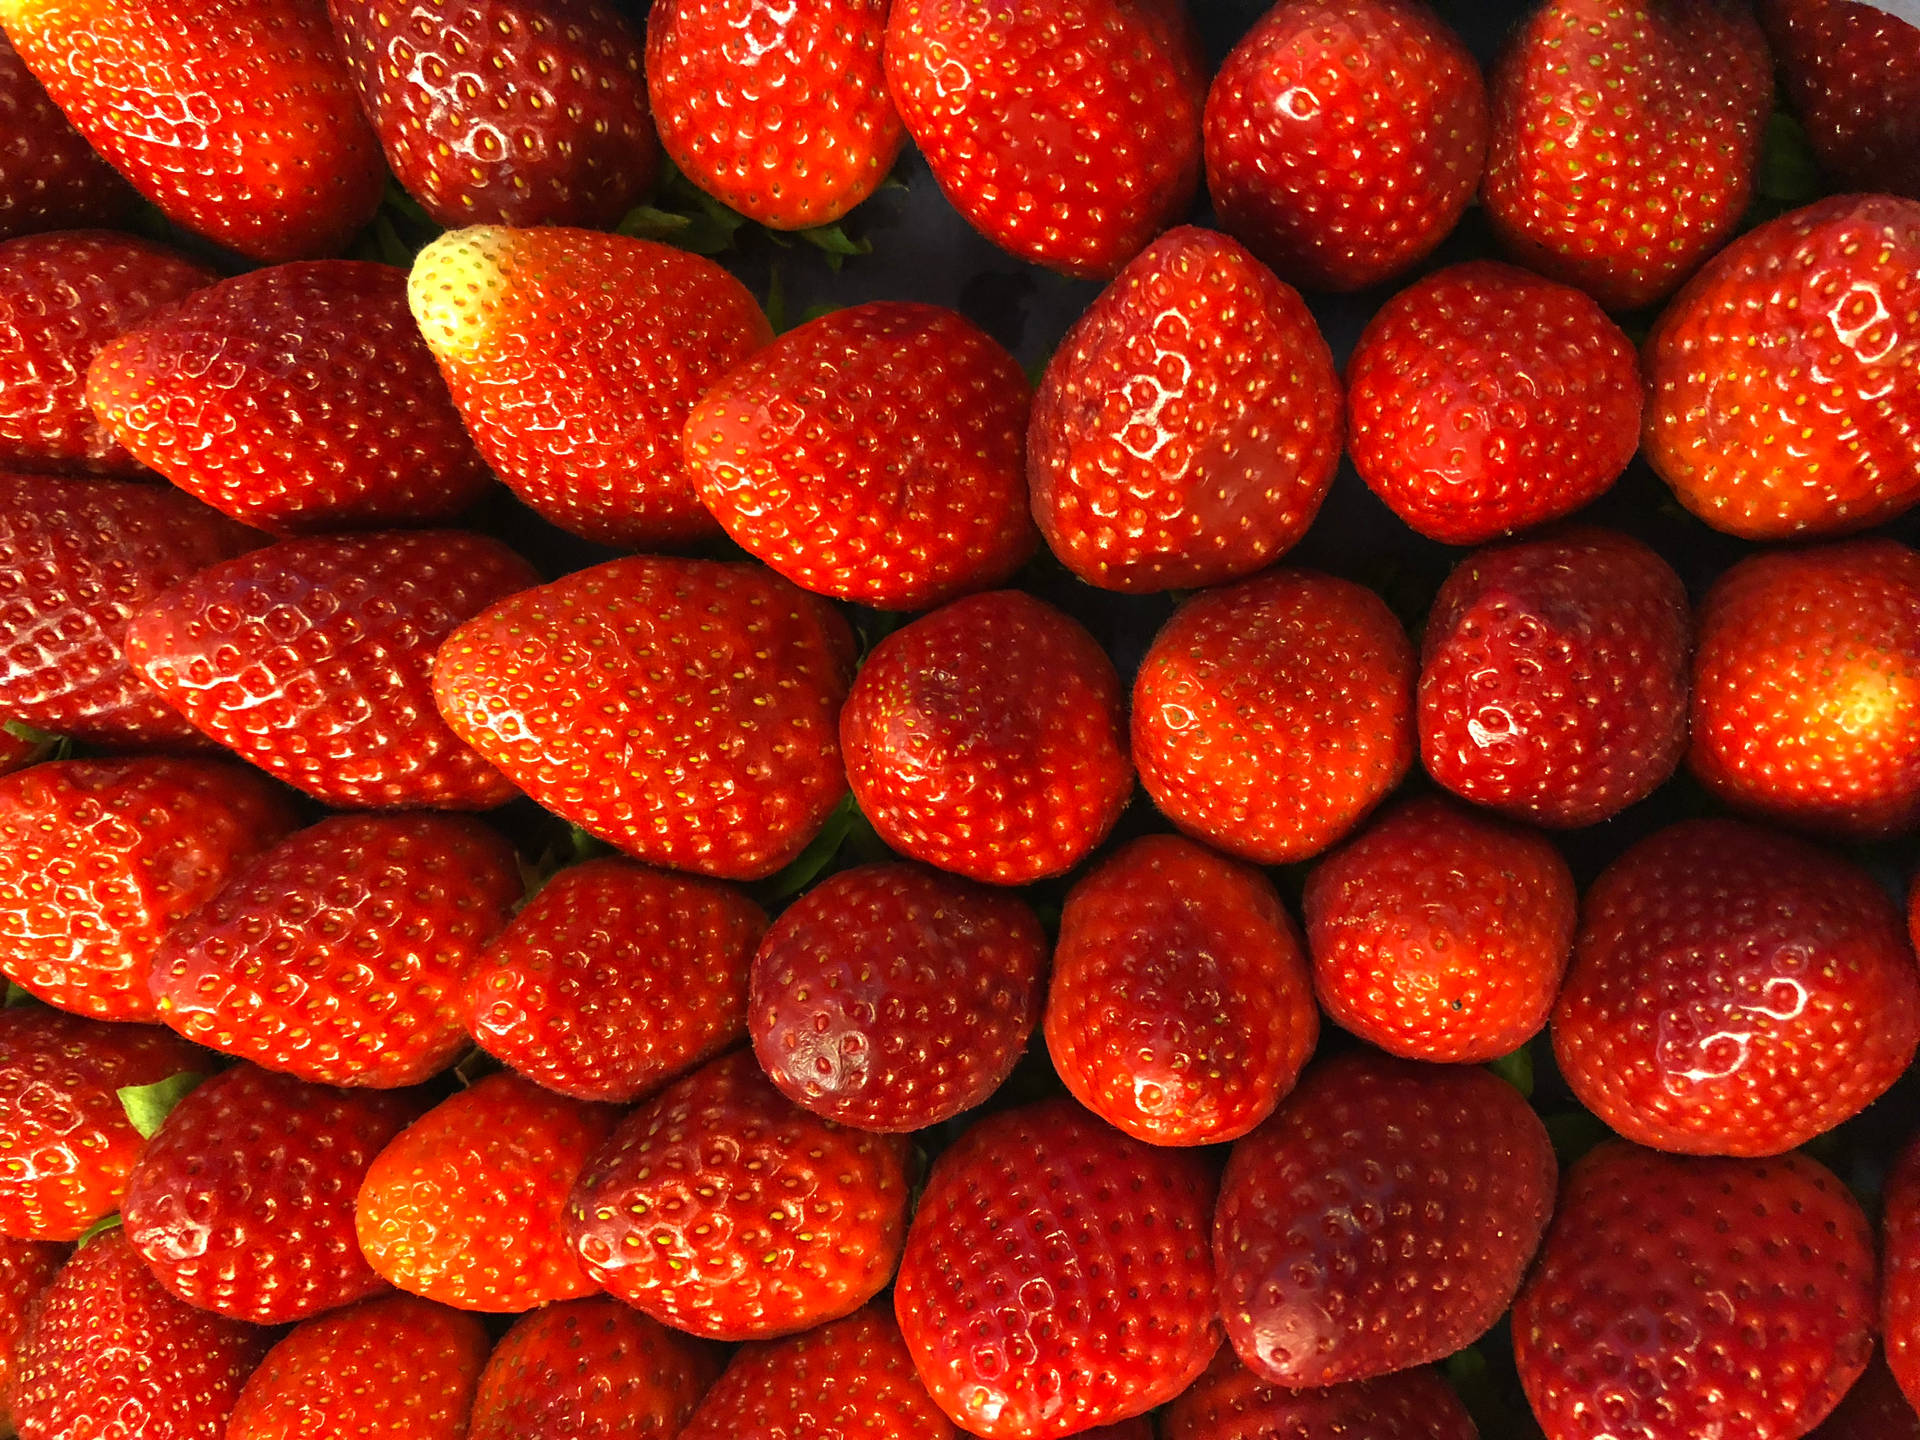 Fruit 4032X3024 Wallpaper and Background Image